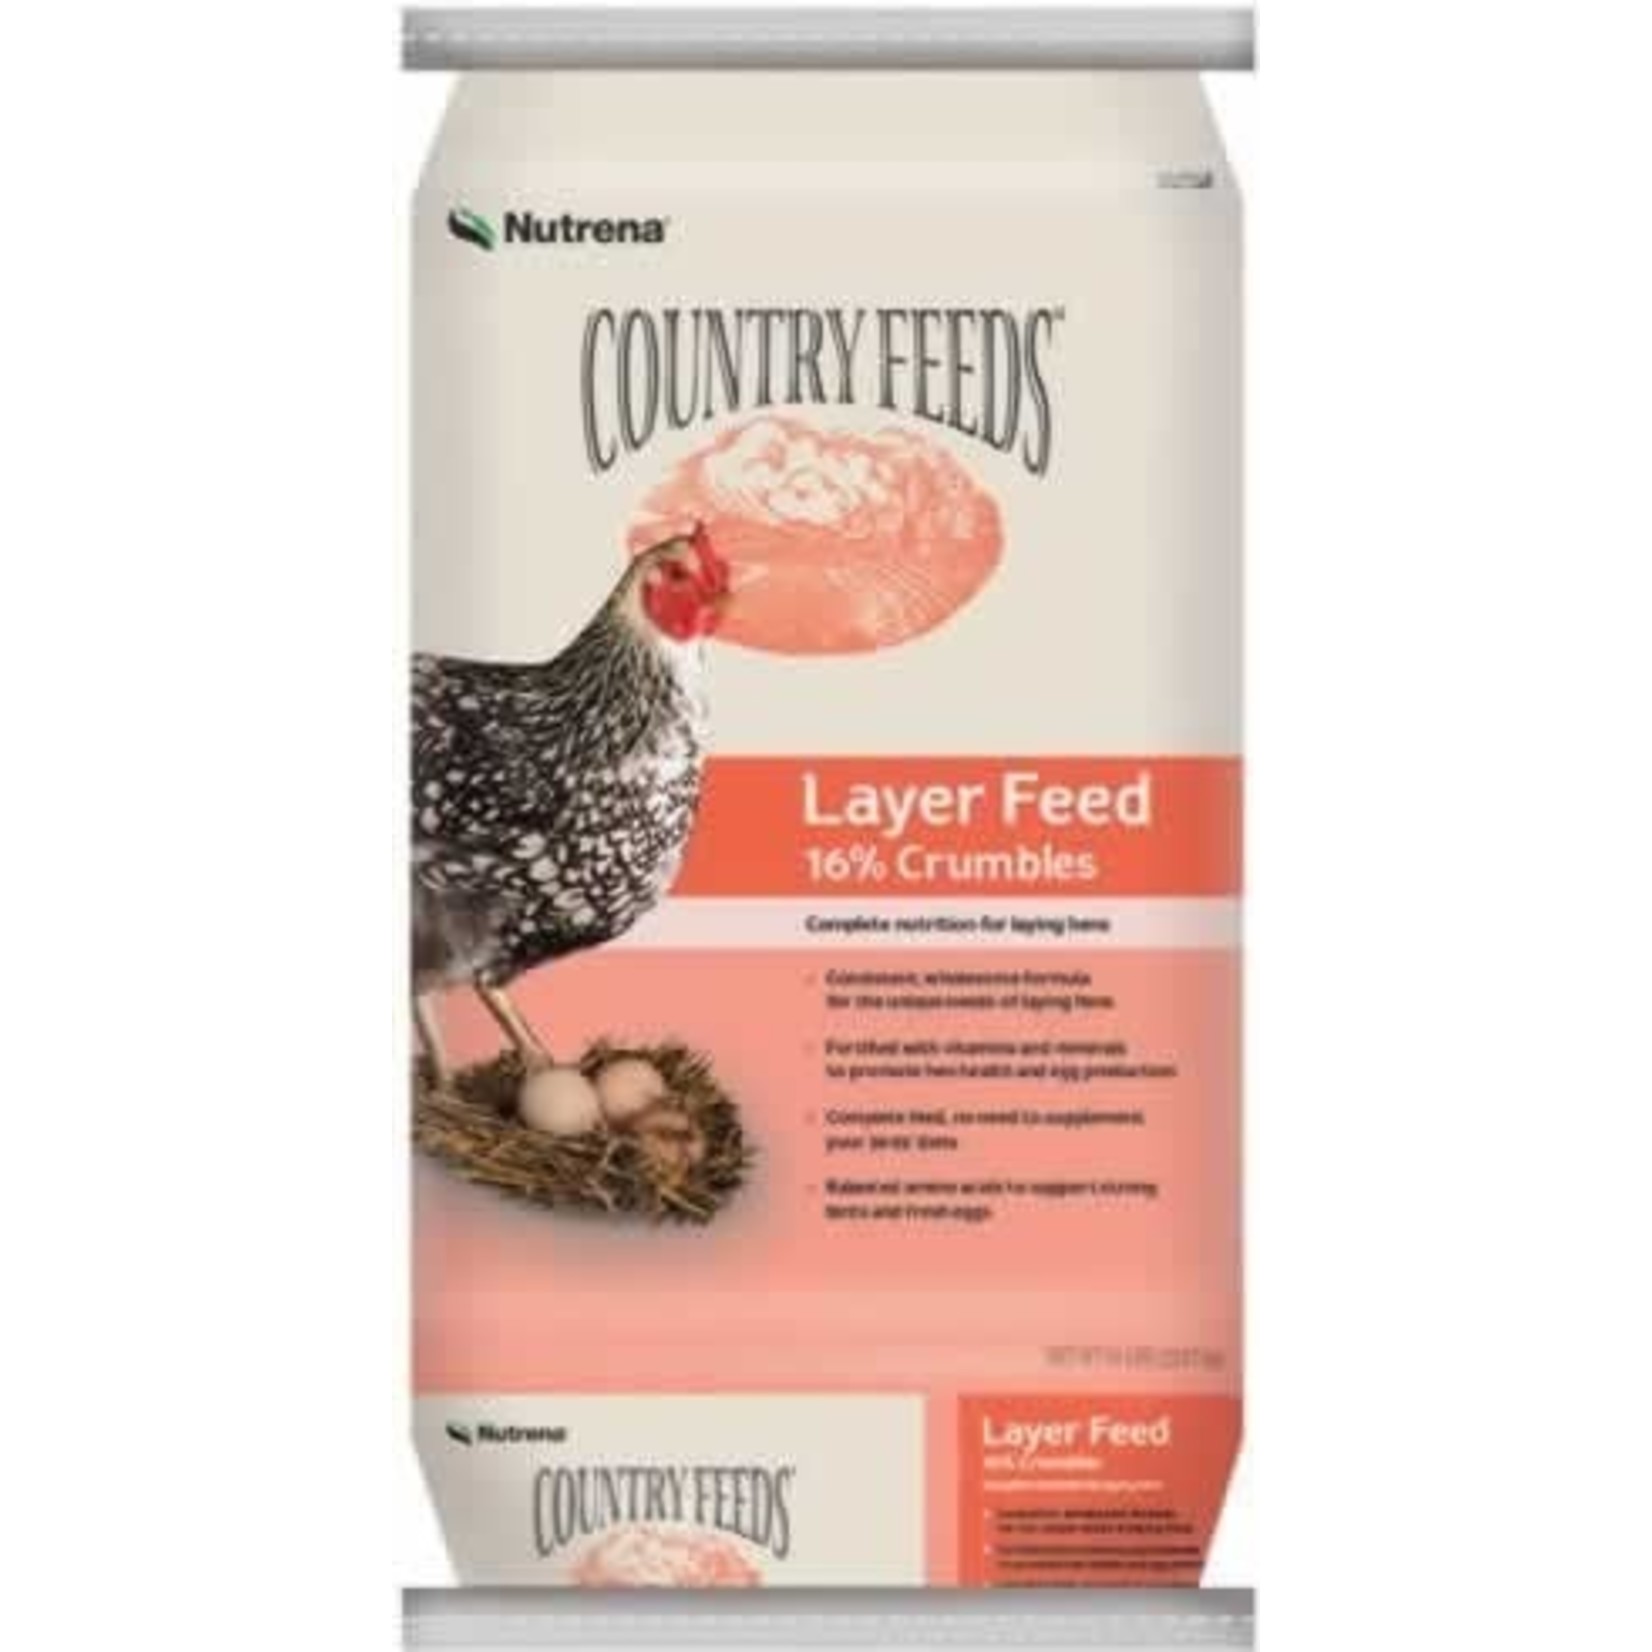 Country Feeds by Nutrena CF LAYER CRUMBLE 16%